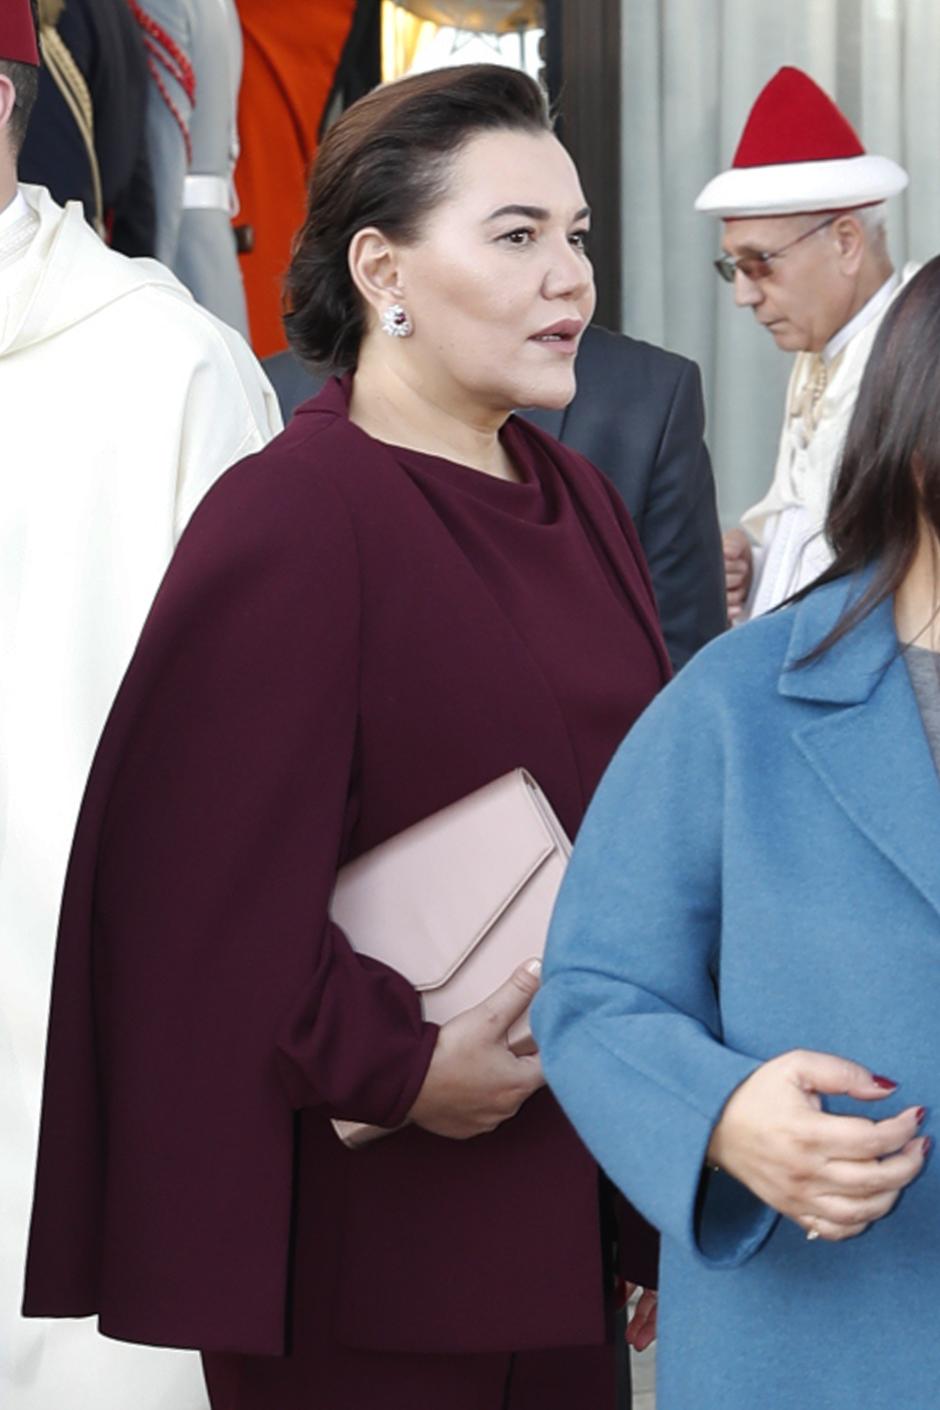 Lalla Hasna during oficial evet in Rabat on Wednesday 13 Februry 2019